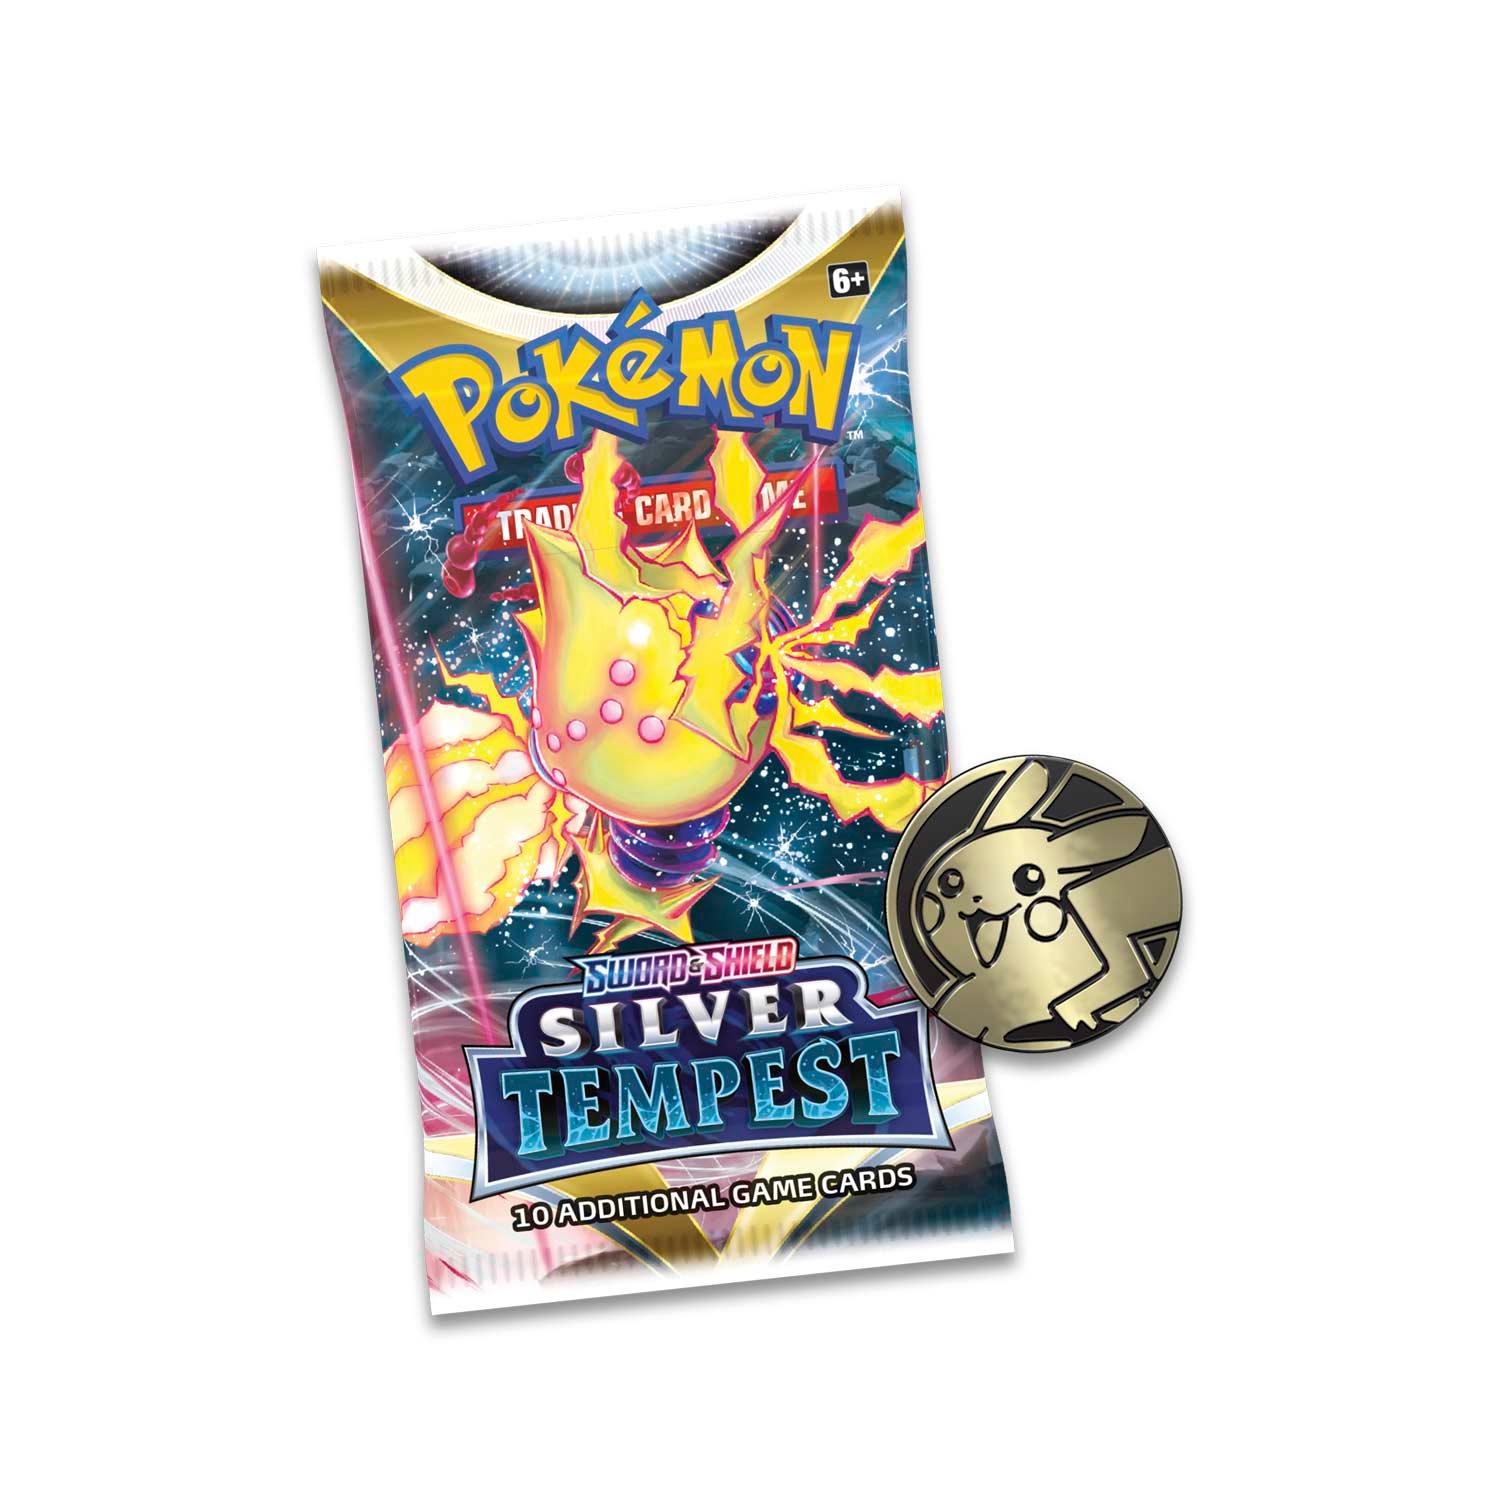 Pokemon Triple Booster Pack - Sword & Shield - Silver Tempest - 3 Boosters Packs & Manaphy Promo Card & 1 Coin - Hobby Champion Inc